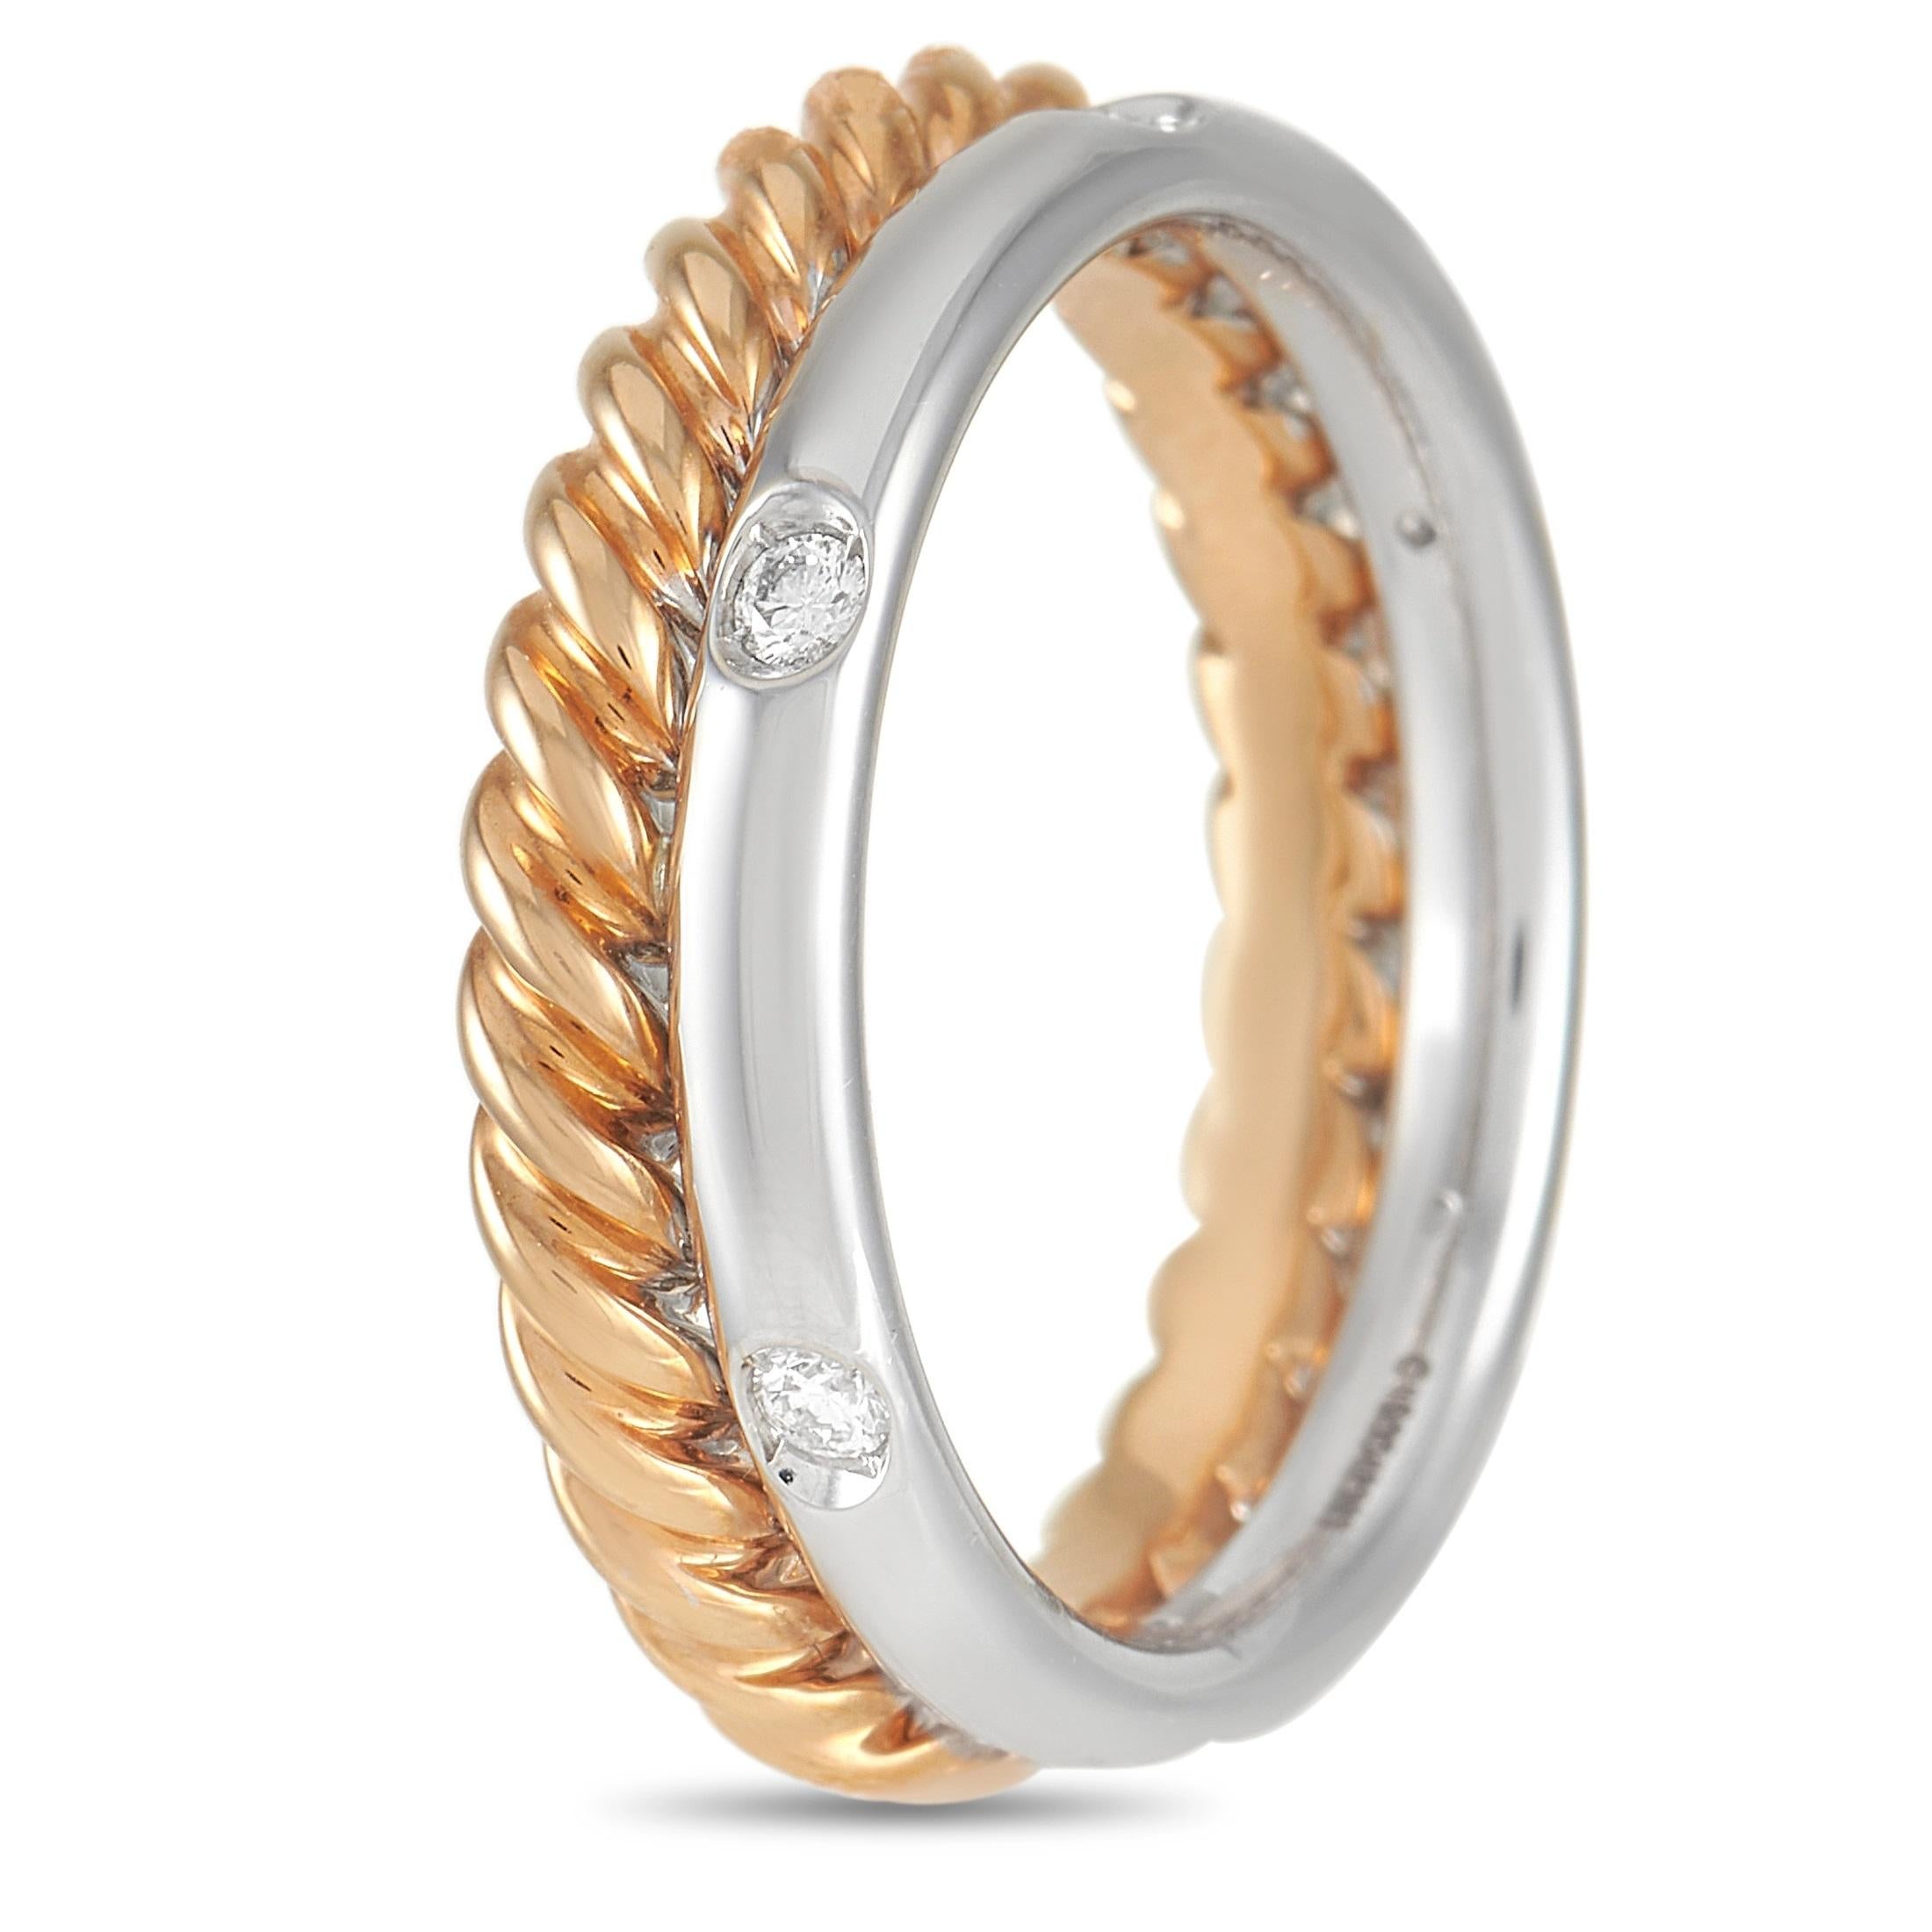 18K Rose Gold and 18K White Gold are beautifully juxtaposed on this stacked Pomellato Milano ring. Incredibly charming, this dynamic design pairs a textured gold band with a sleek white gold band dotted with glittering diamonds totaling 0.13 carats.